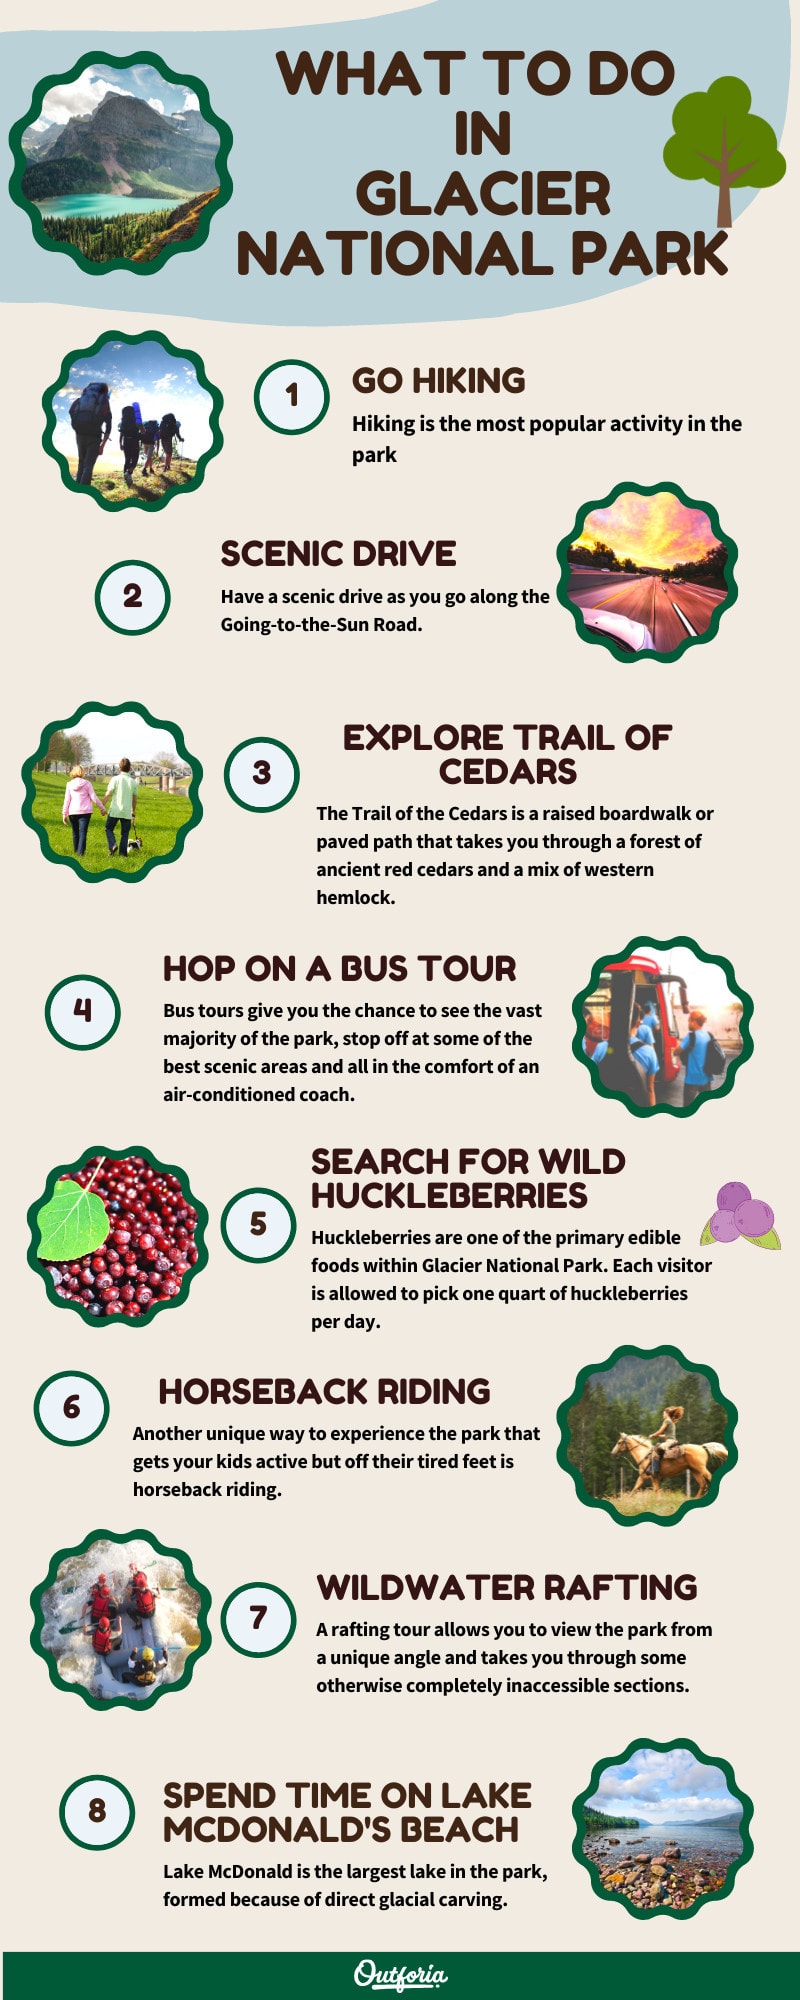 What to do in Glacier National Park infographic